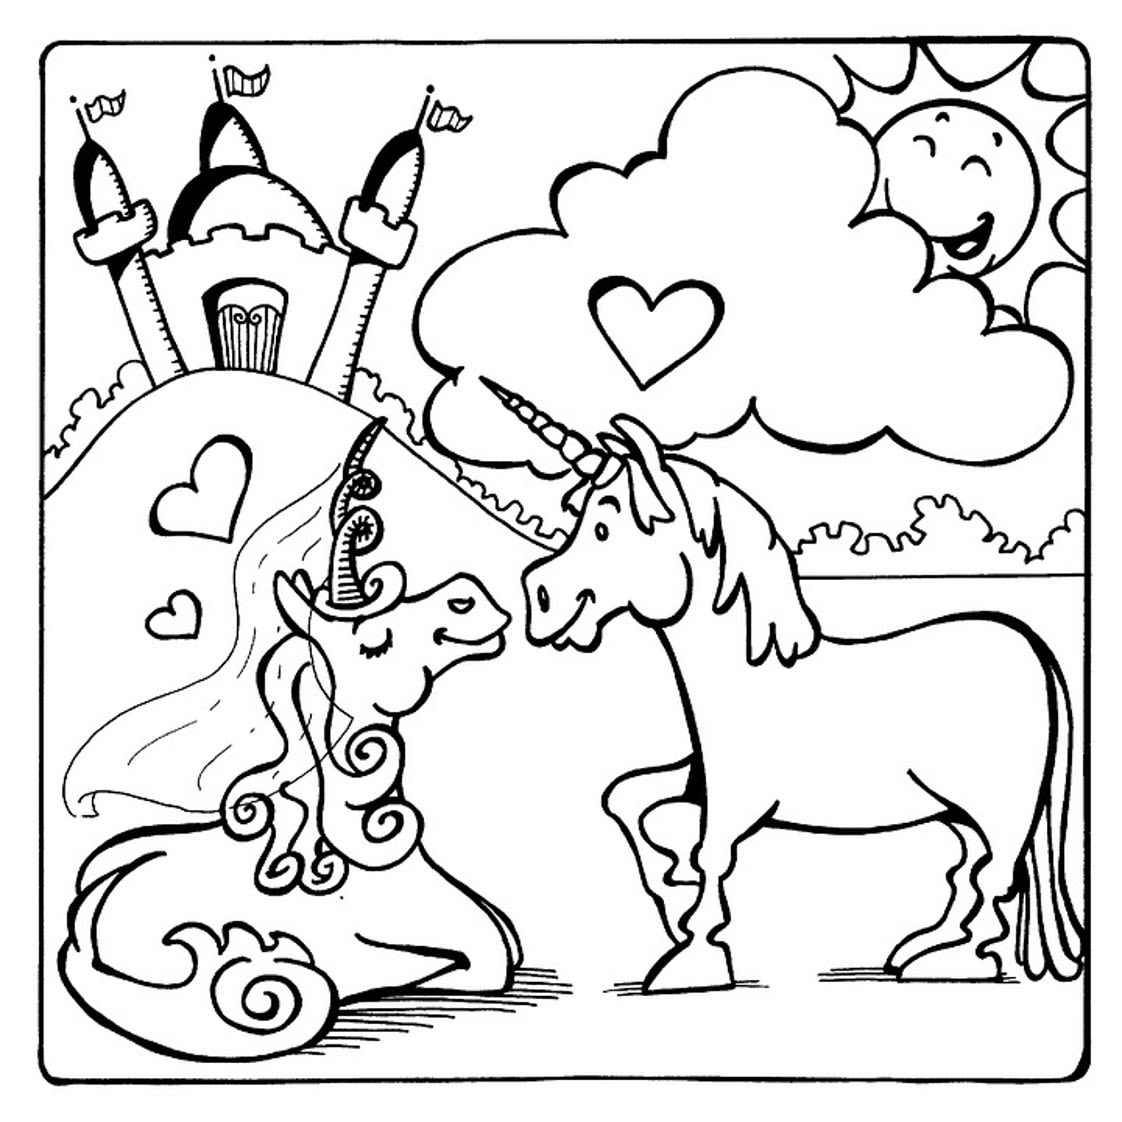 Following Directions With Visual Supports - A Unicorn and Castle Activity image